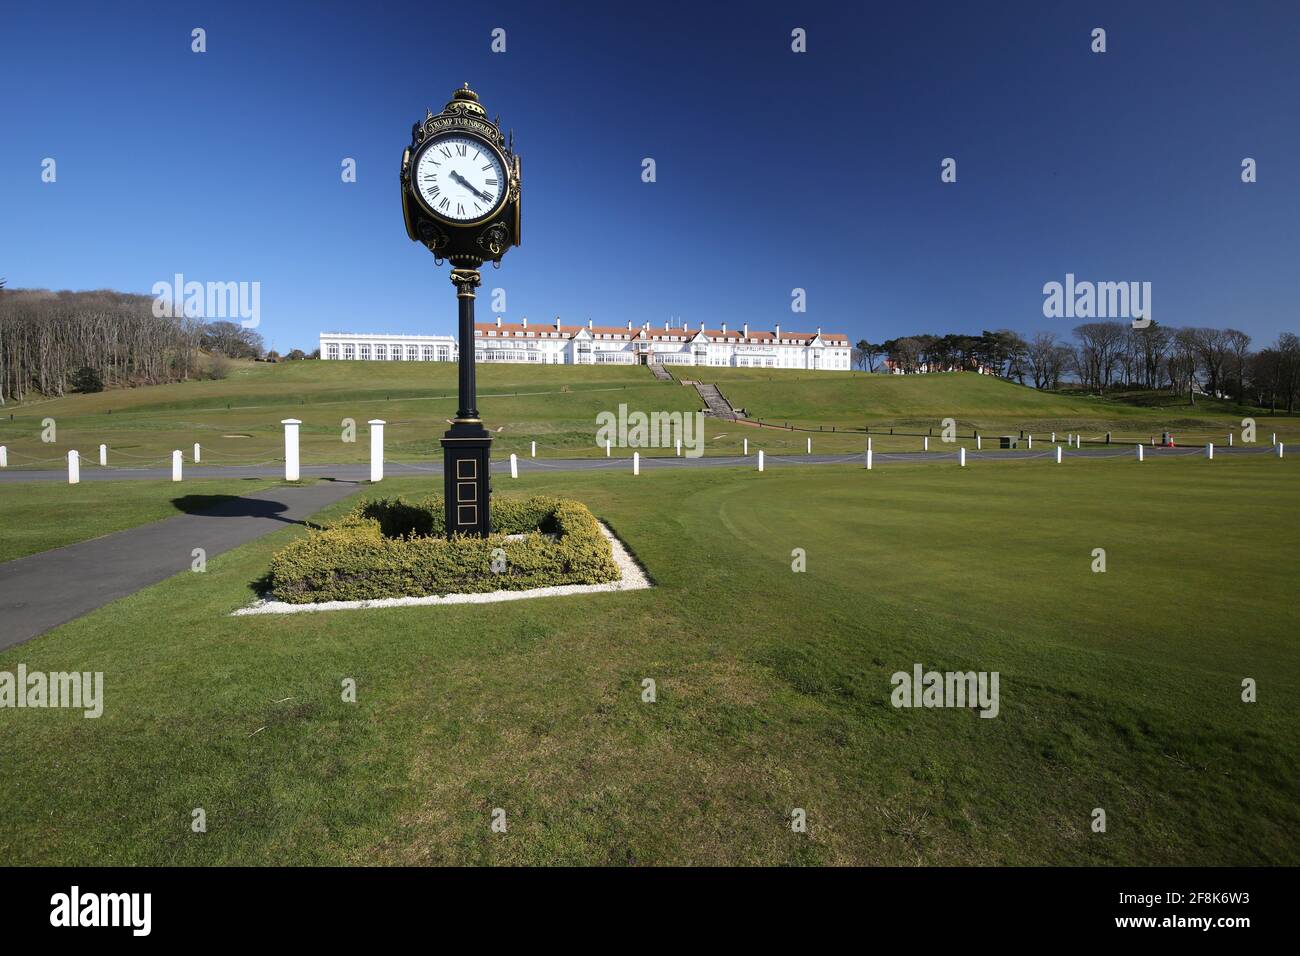 Scotland, Turnberry, Ayrshire, 12 April 2021. Large clock outside Turnberry Club house with the name of Trump on it  & the hotel in the background Stock Photo